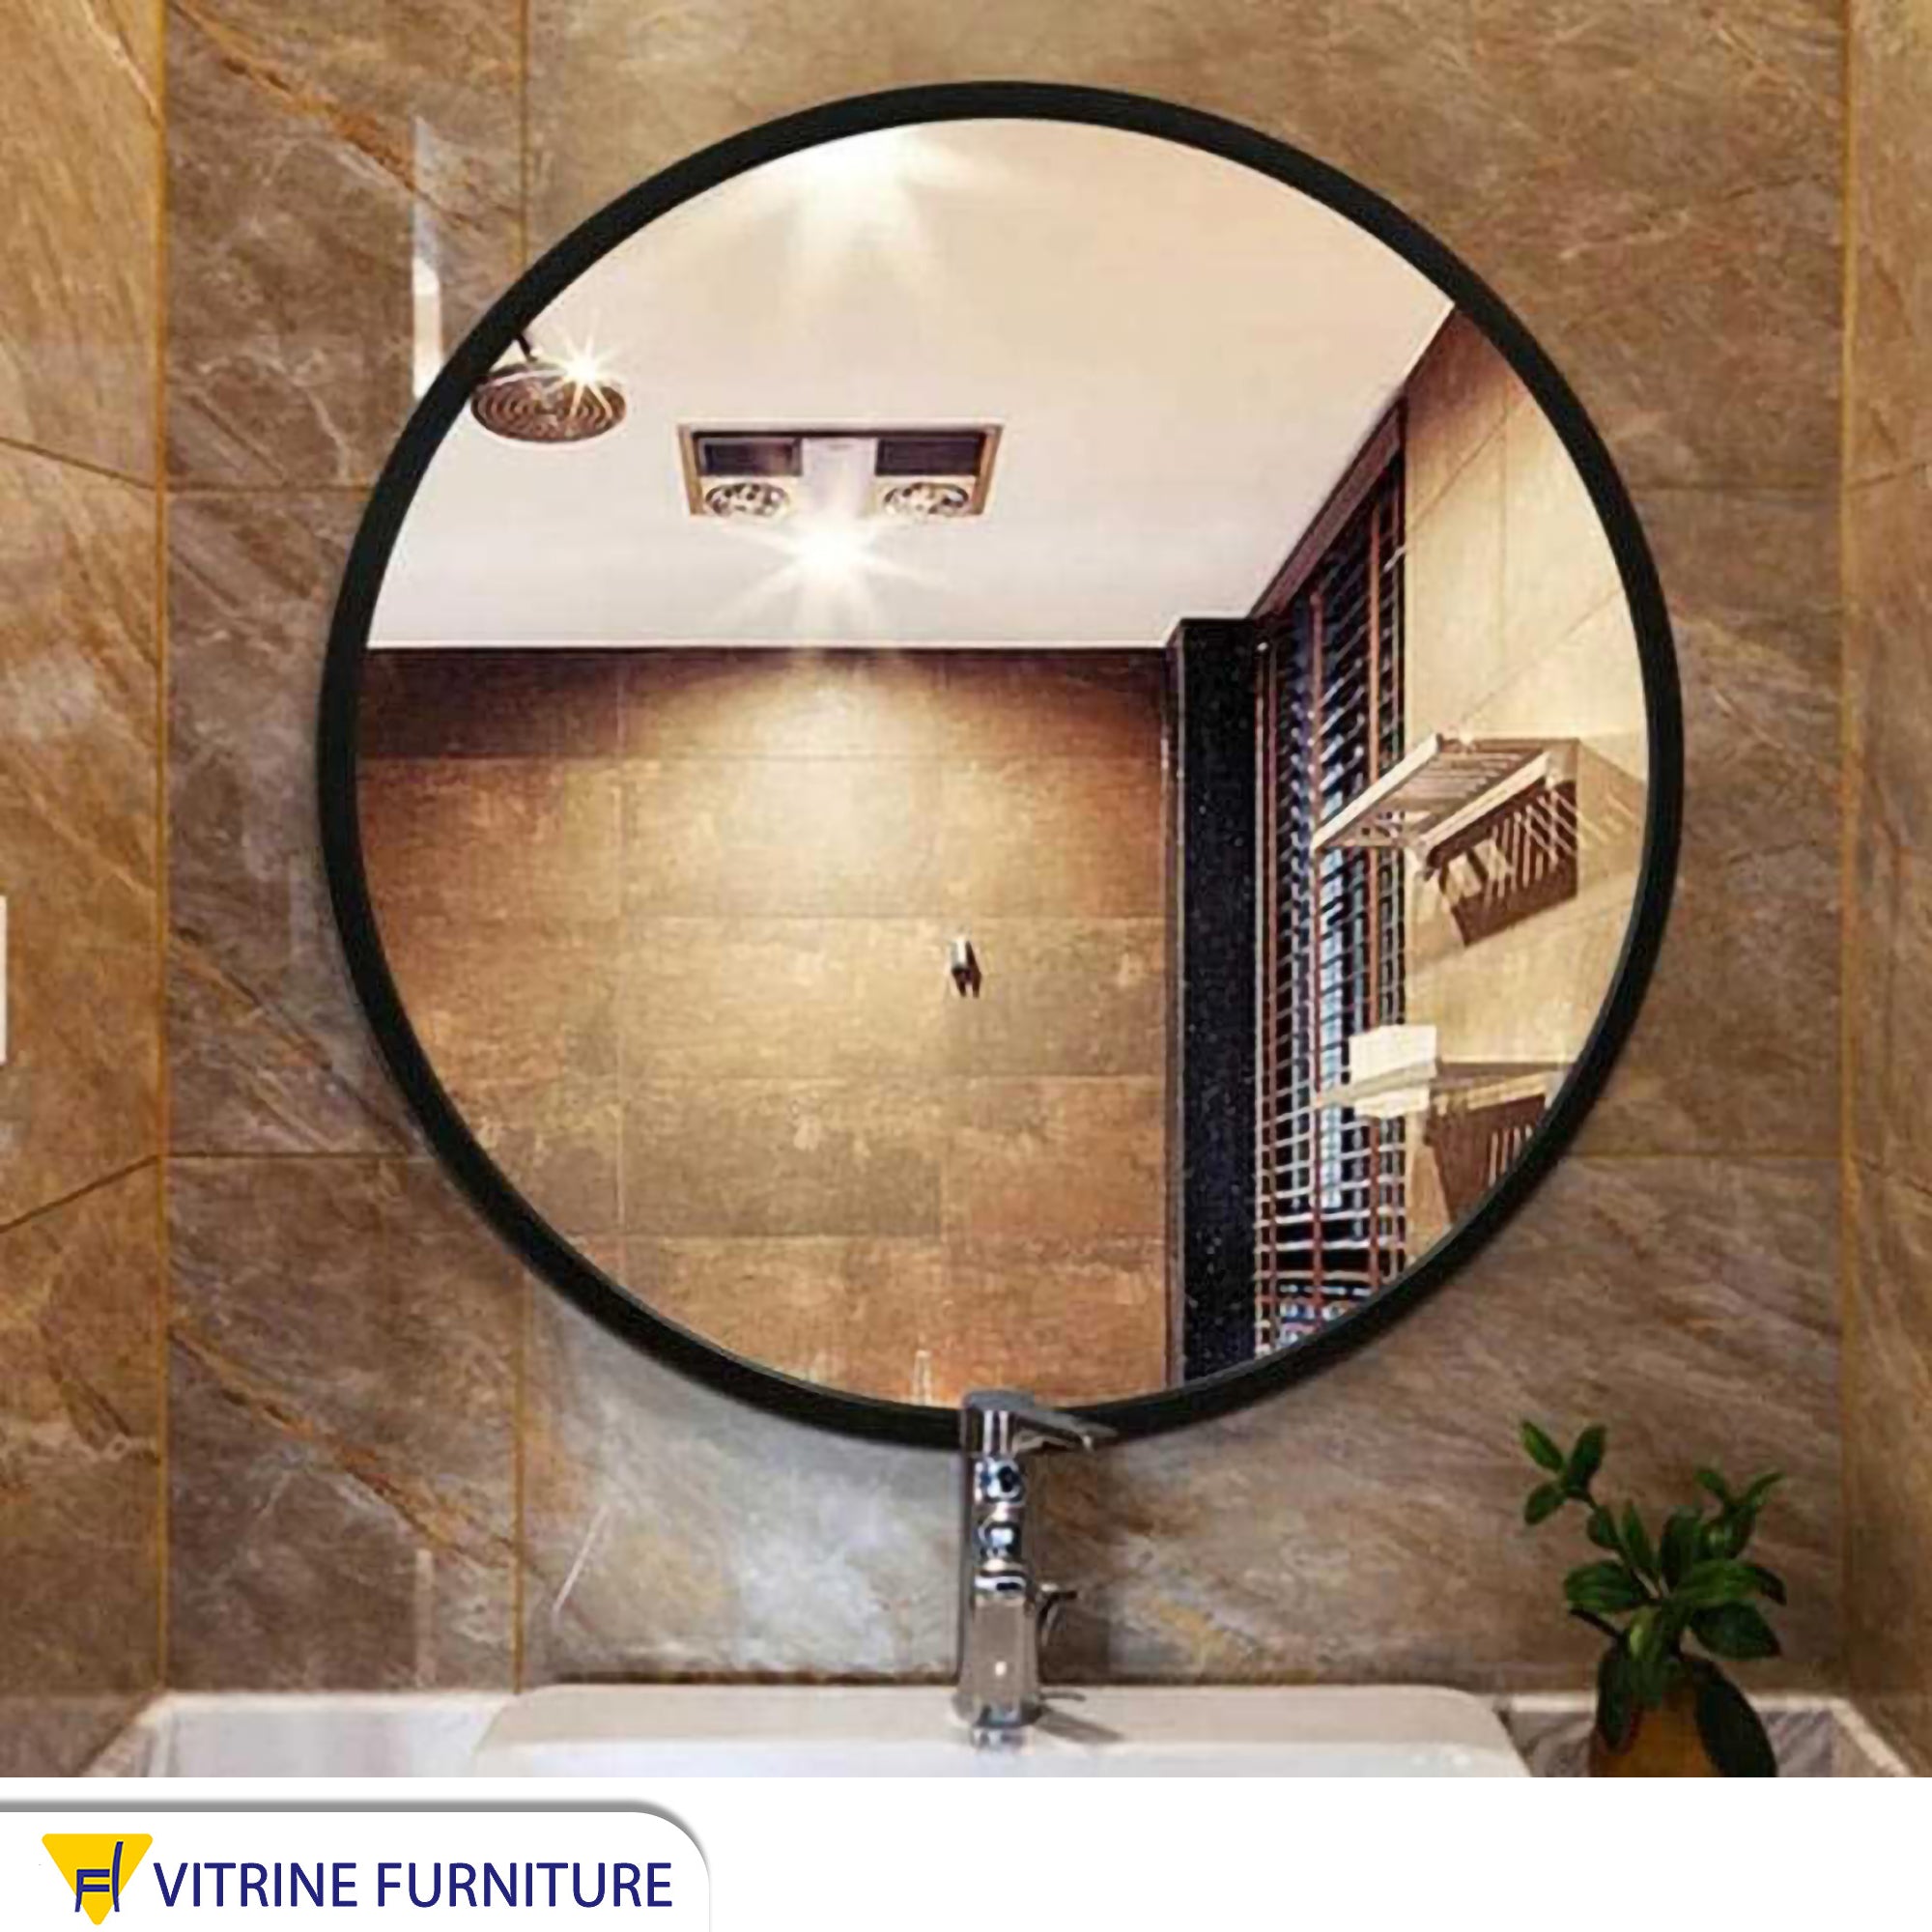 Circular mirror, diameter 60 cm, with a wooden frame in black